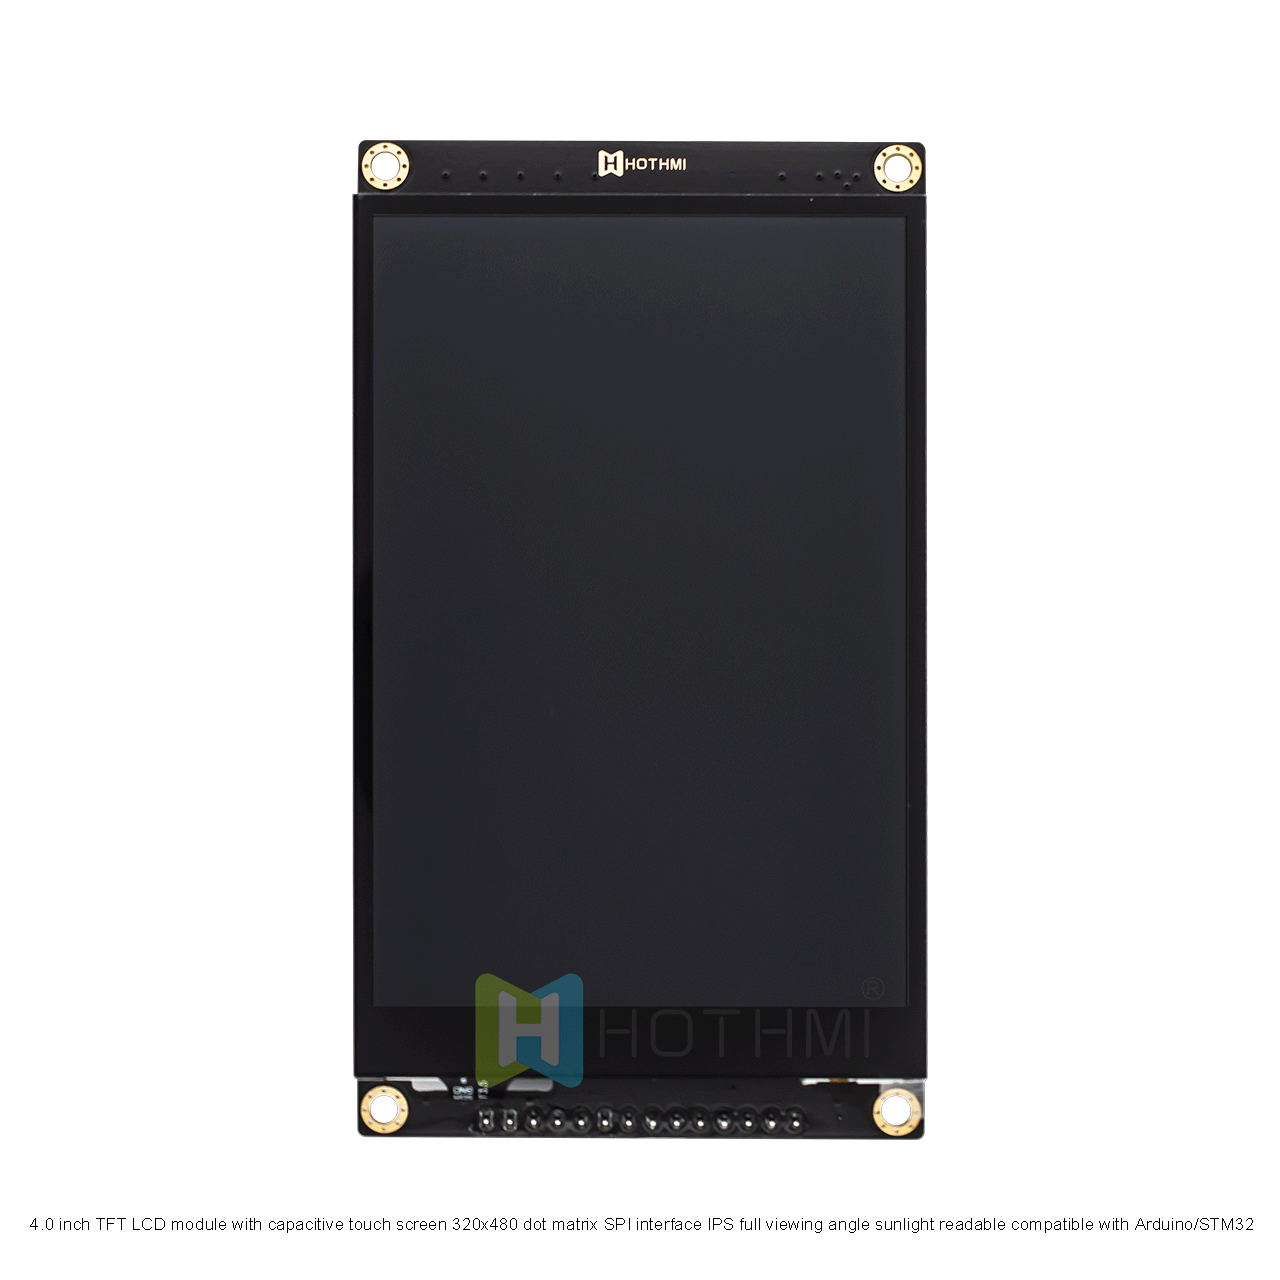 4.0 inch TFT LCD module with capacitive touch screen 320x480 dot matrix SPI interface IPS full viewing angle sunlight readable compatible with Arduino/STM32